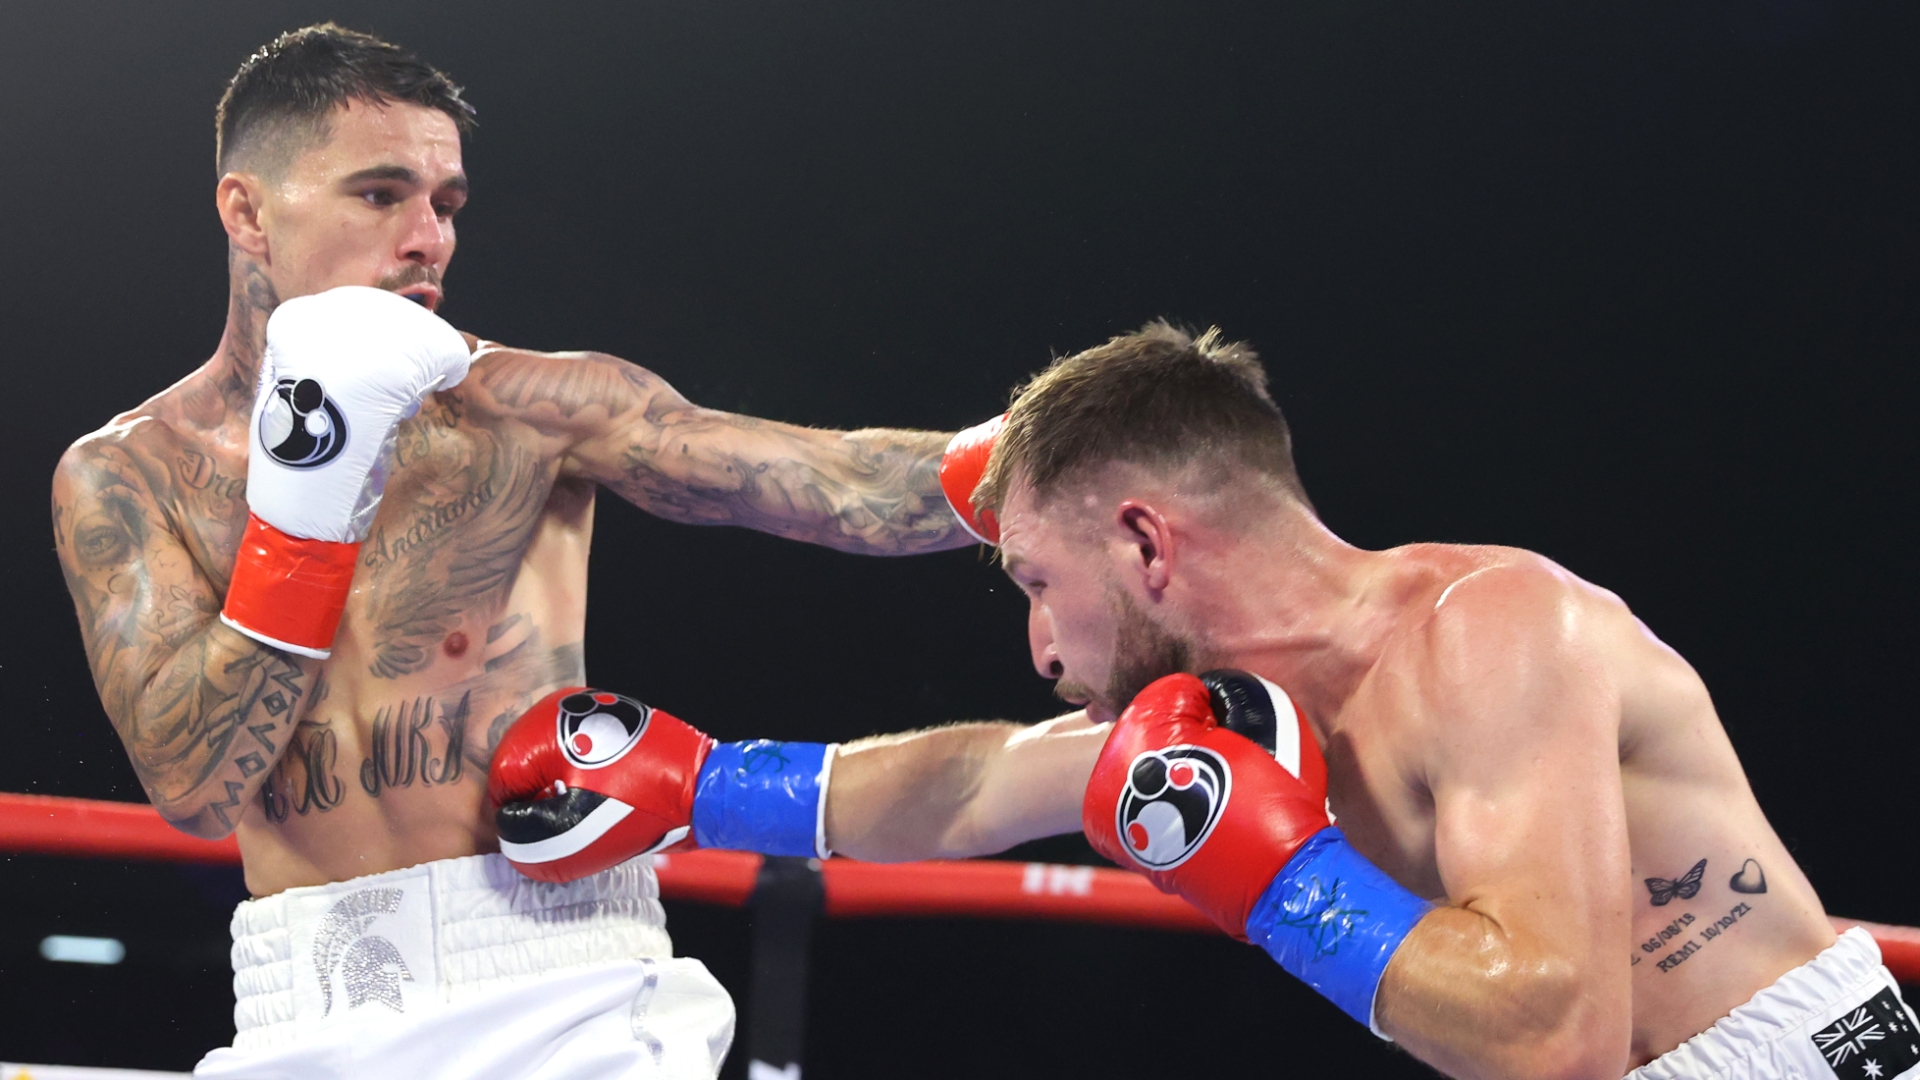 George Kambosos narrowly escapes with majority decision win - Stream the Video